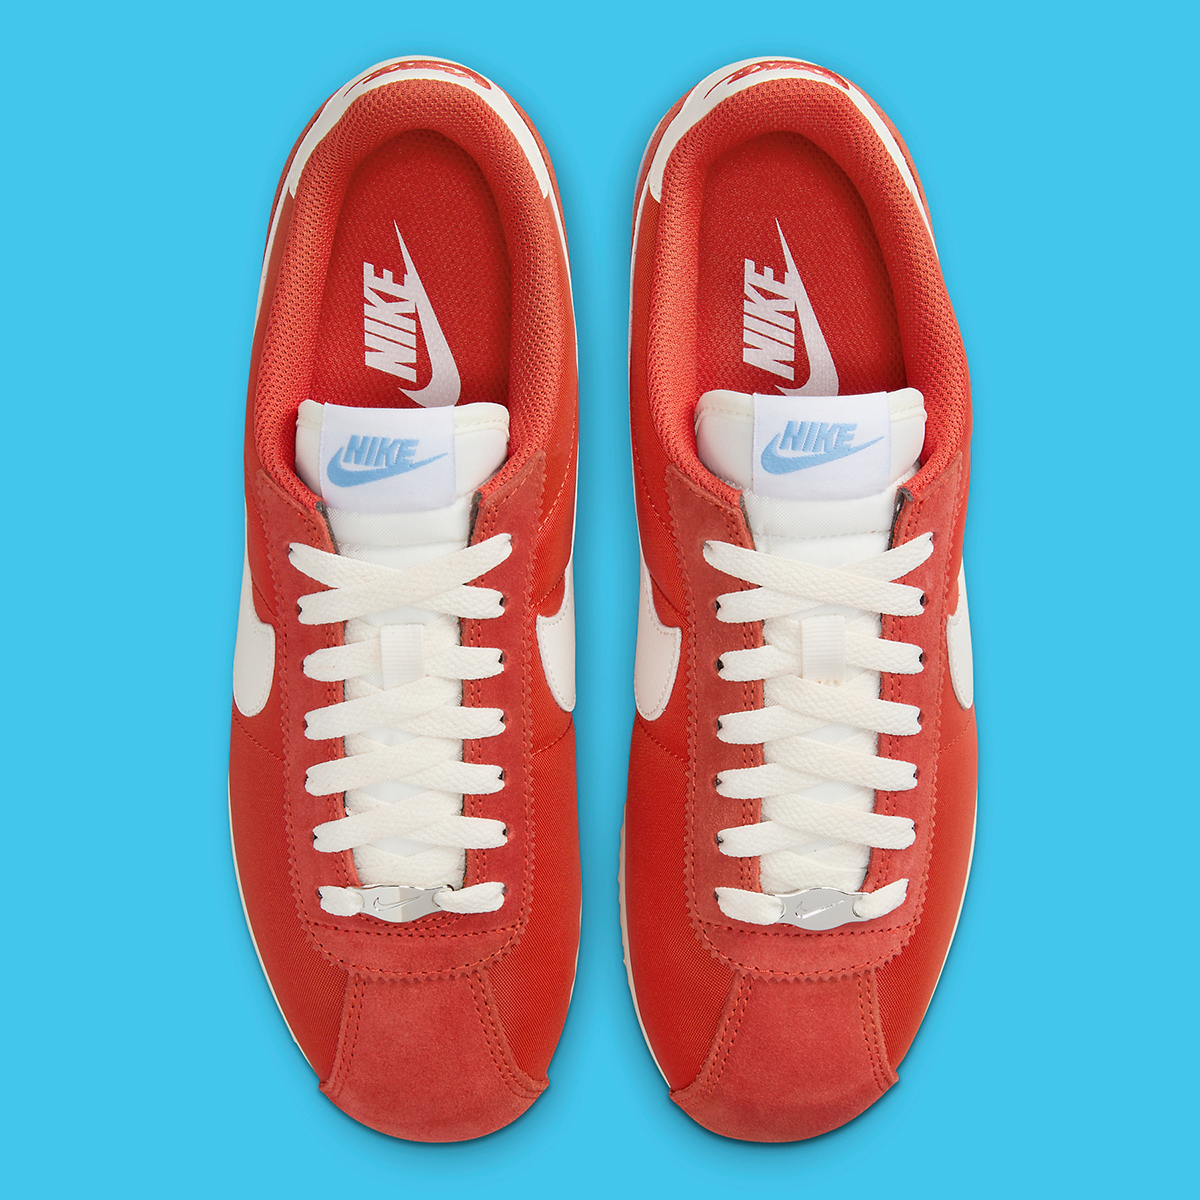 nike with cortez womens picante red university blue dz2795 601 5